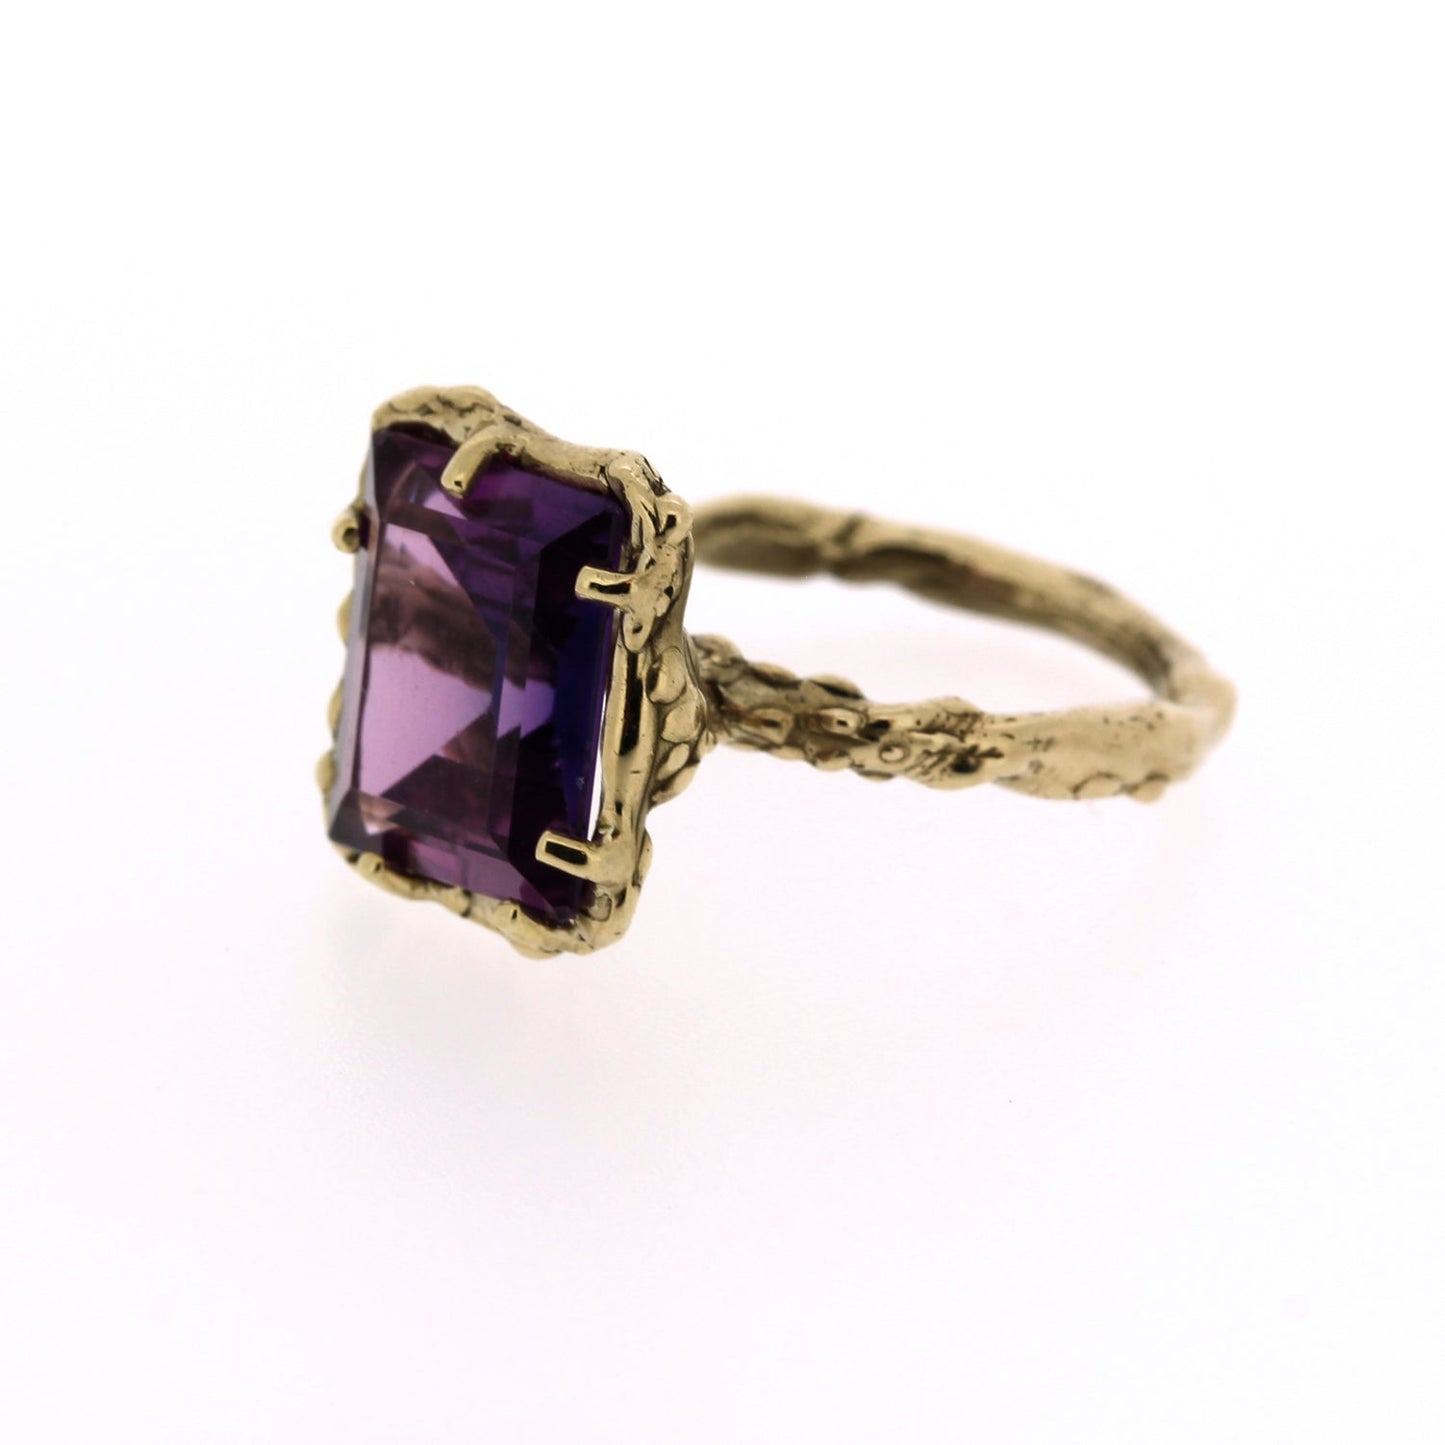 Full view of side of Giovanna Ring. This ring is made of yellow gold, ahs an organic texture throughout its setting and band and has a set rectangular purple sapphire at the top.